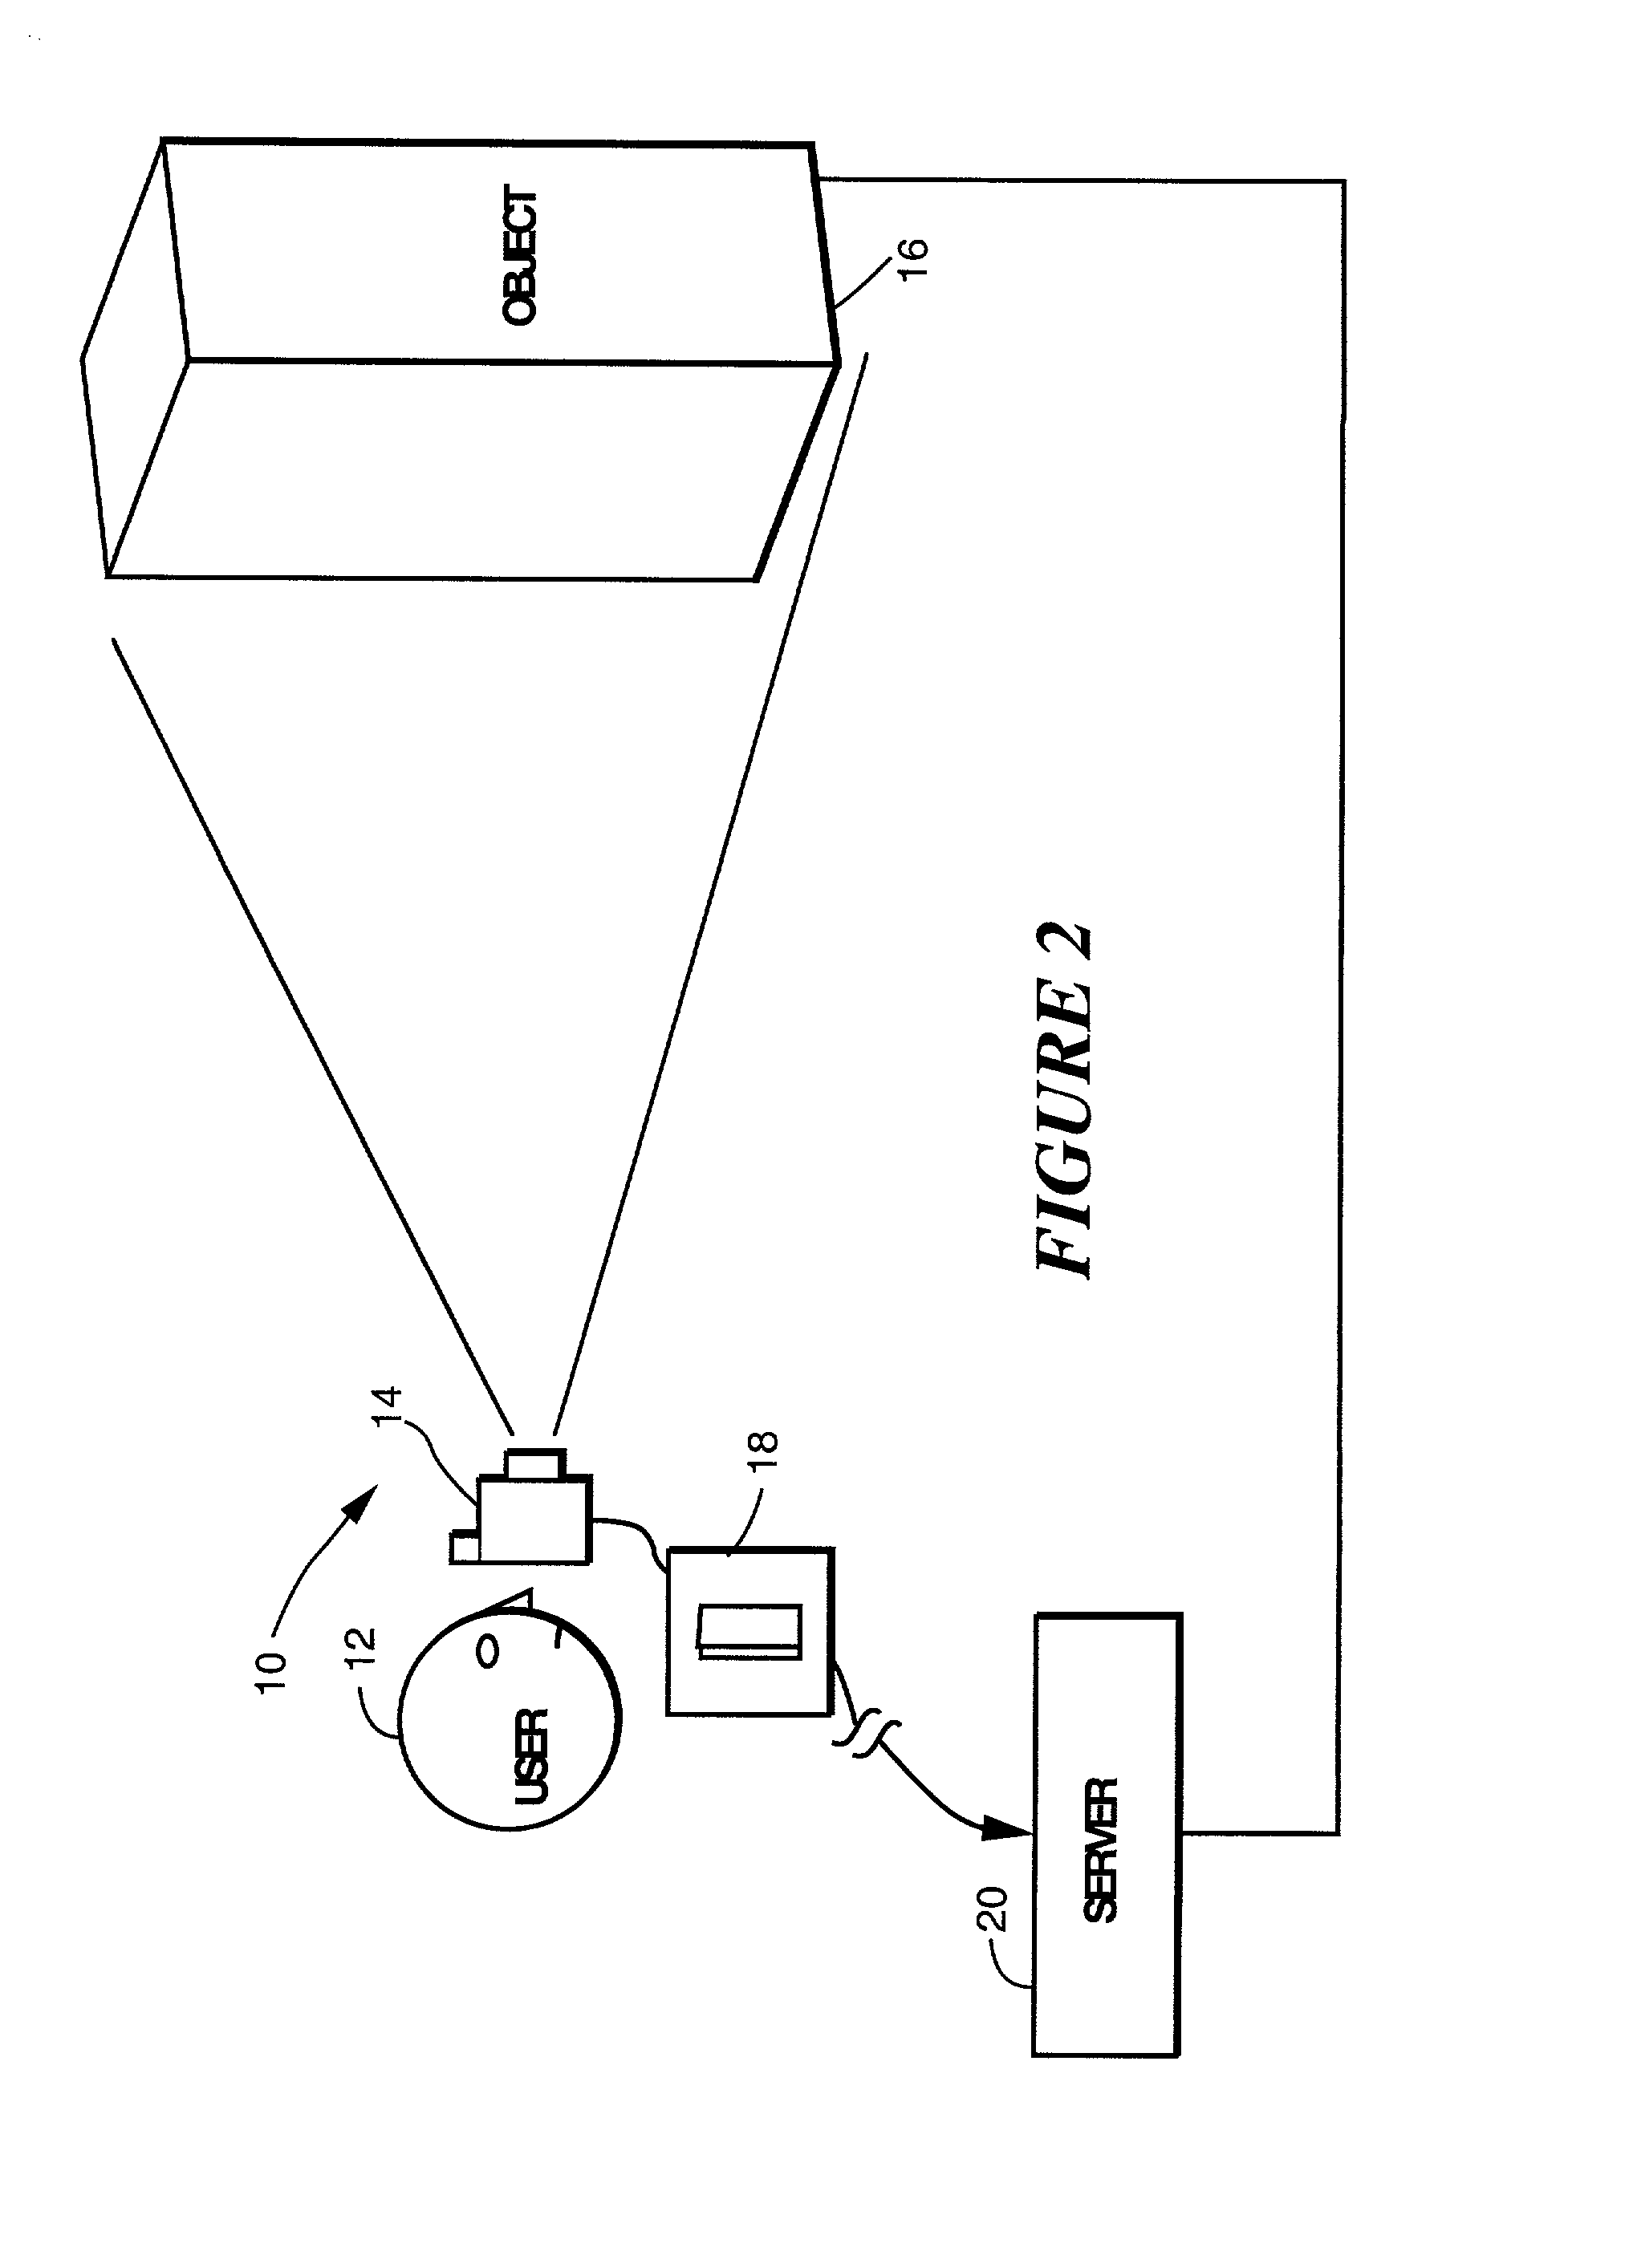 Image capture and identification system and process